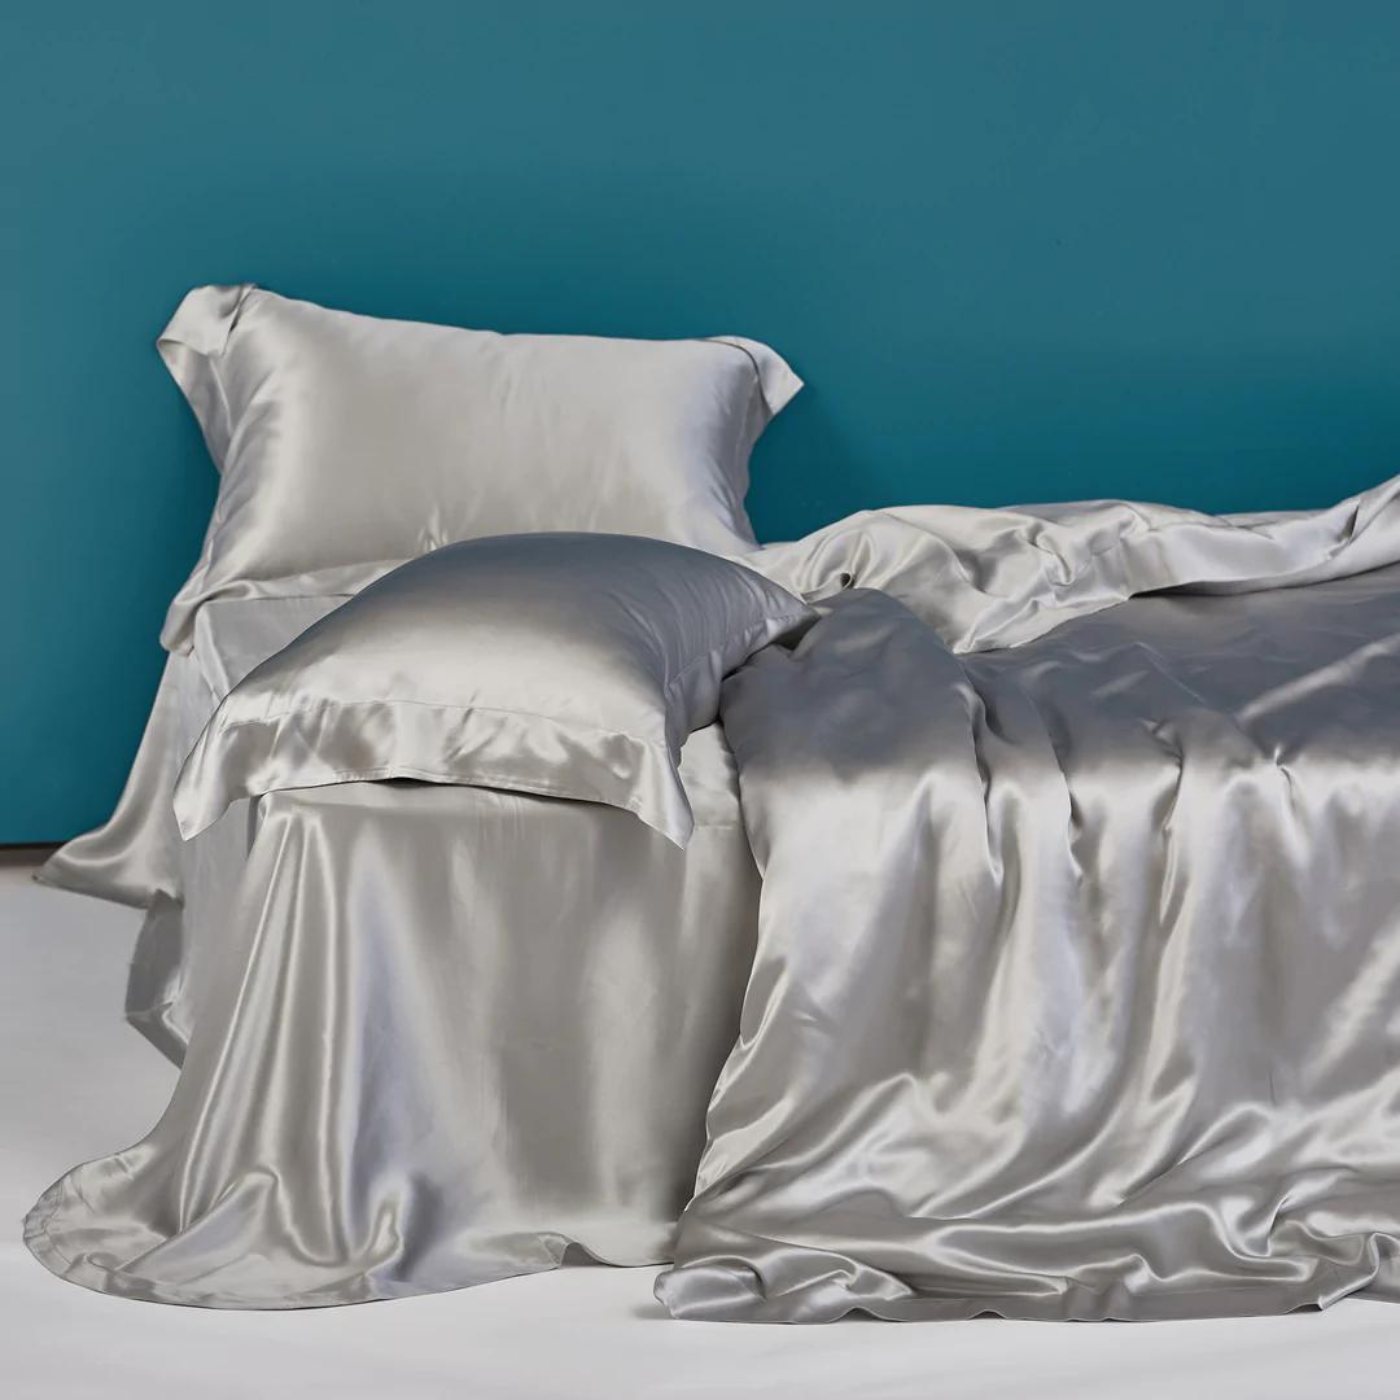 Luxury 4 Psc 22 Momme 100% Mulberry Silk Bedding Set Duvet Cover Fitted Sheet 2 Pillow Covers Cases in Silver Light Grey